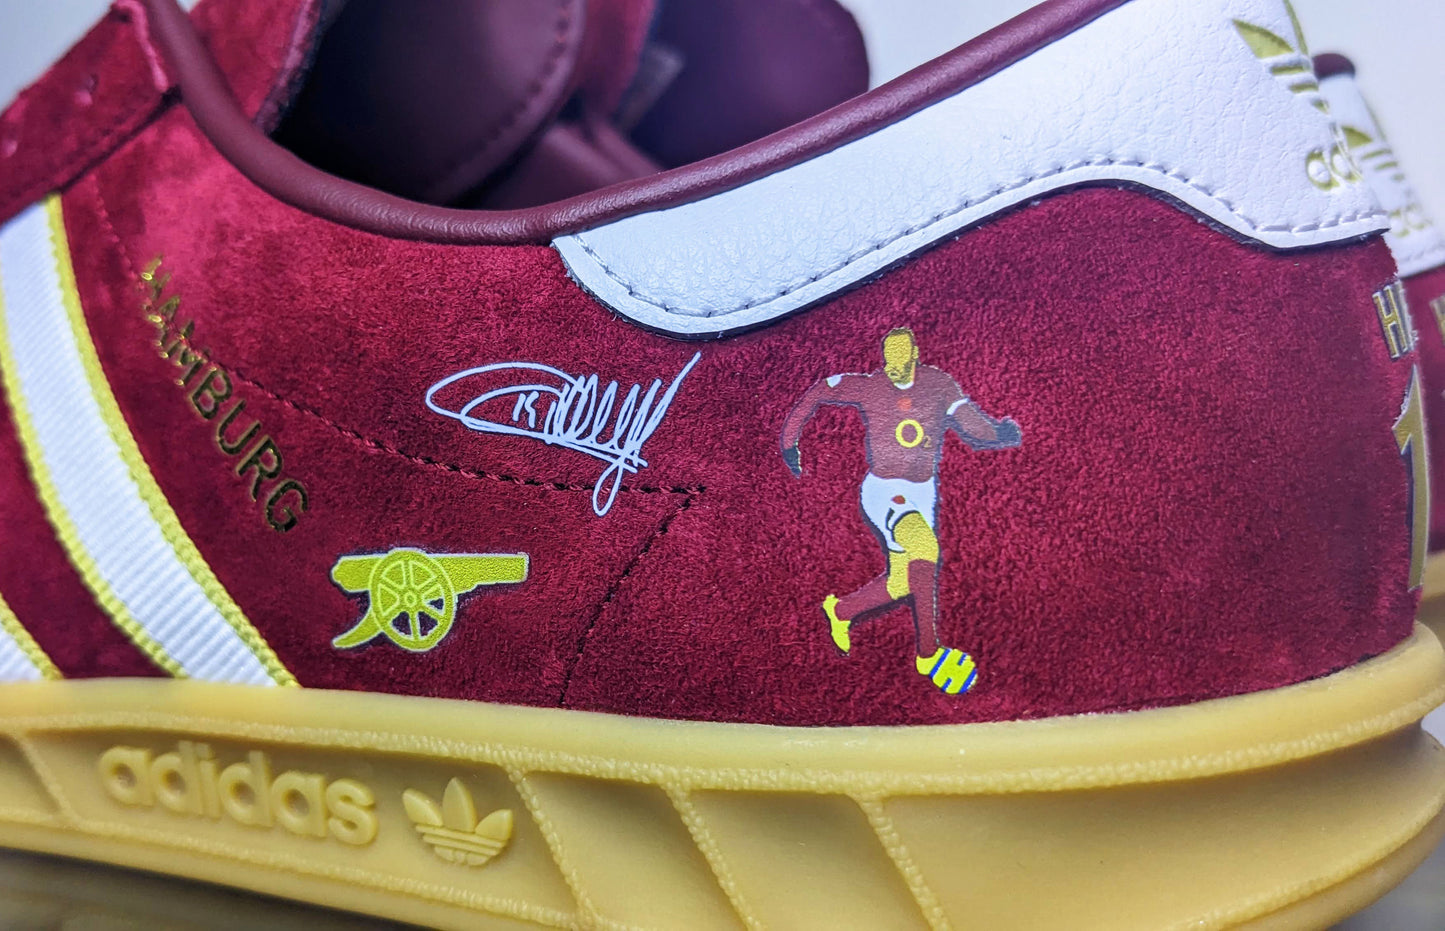 Limited edition Arsenal FC Thierry Henry burgundy / gold Adidas custom Hamburg trainers / sneakers